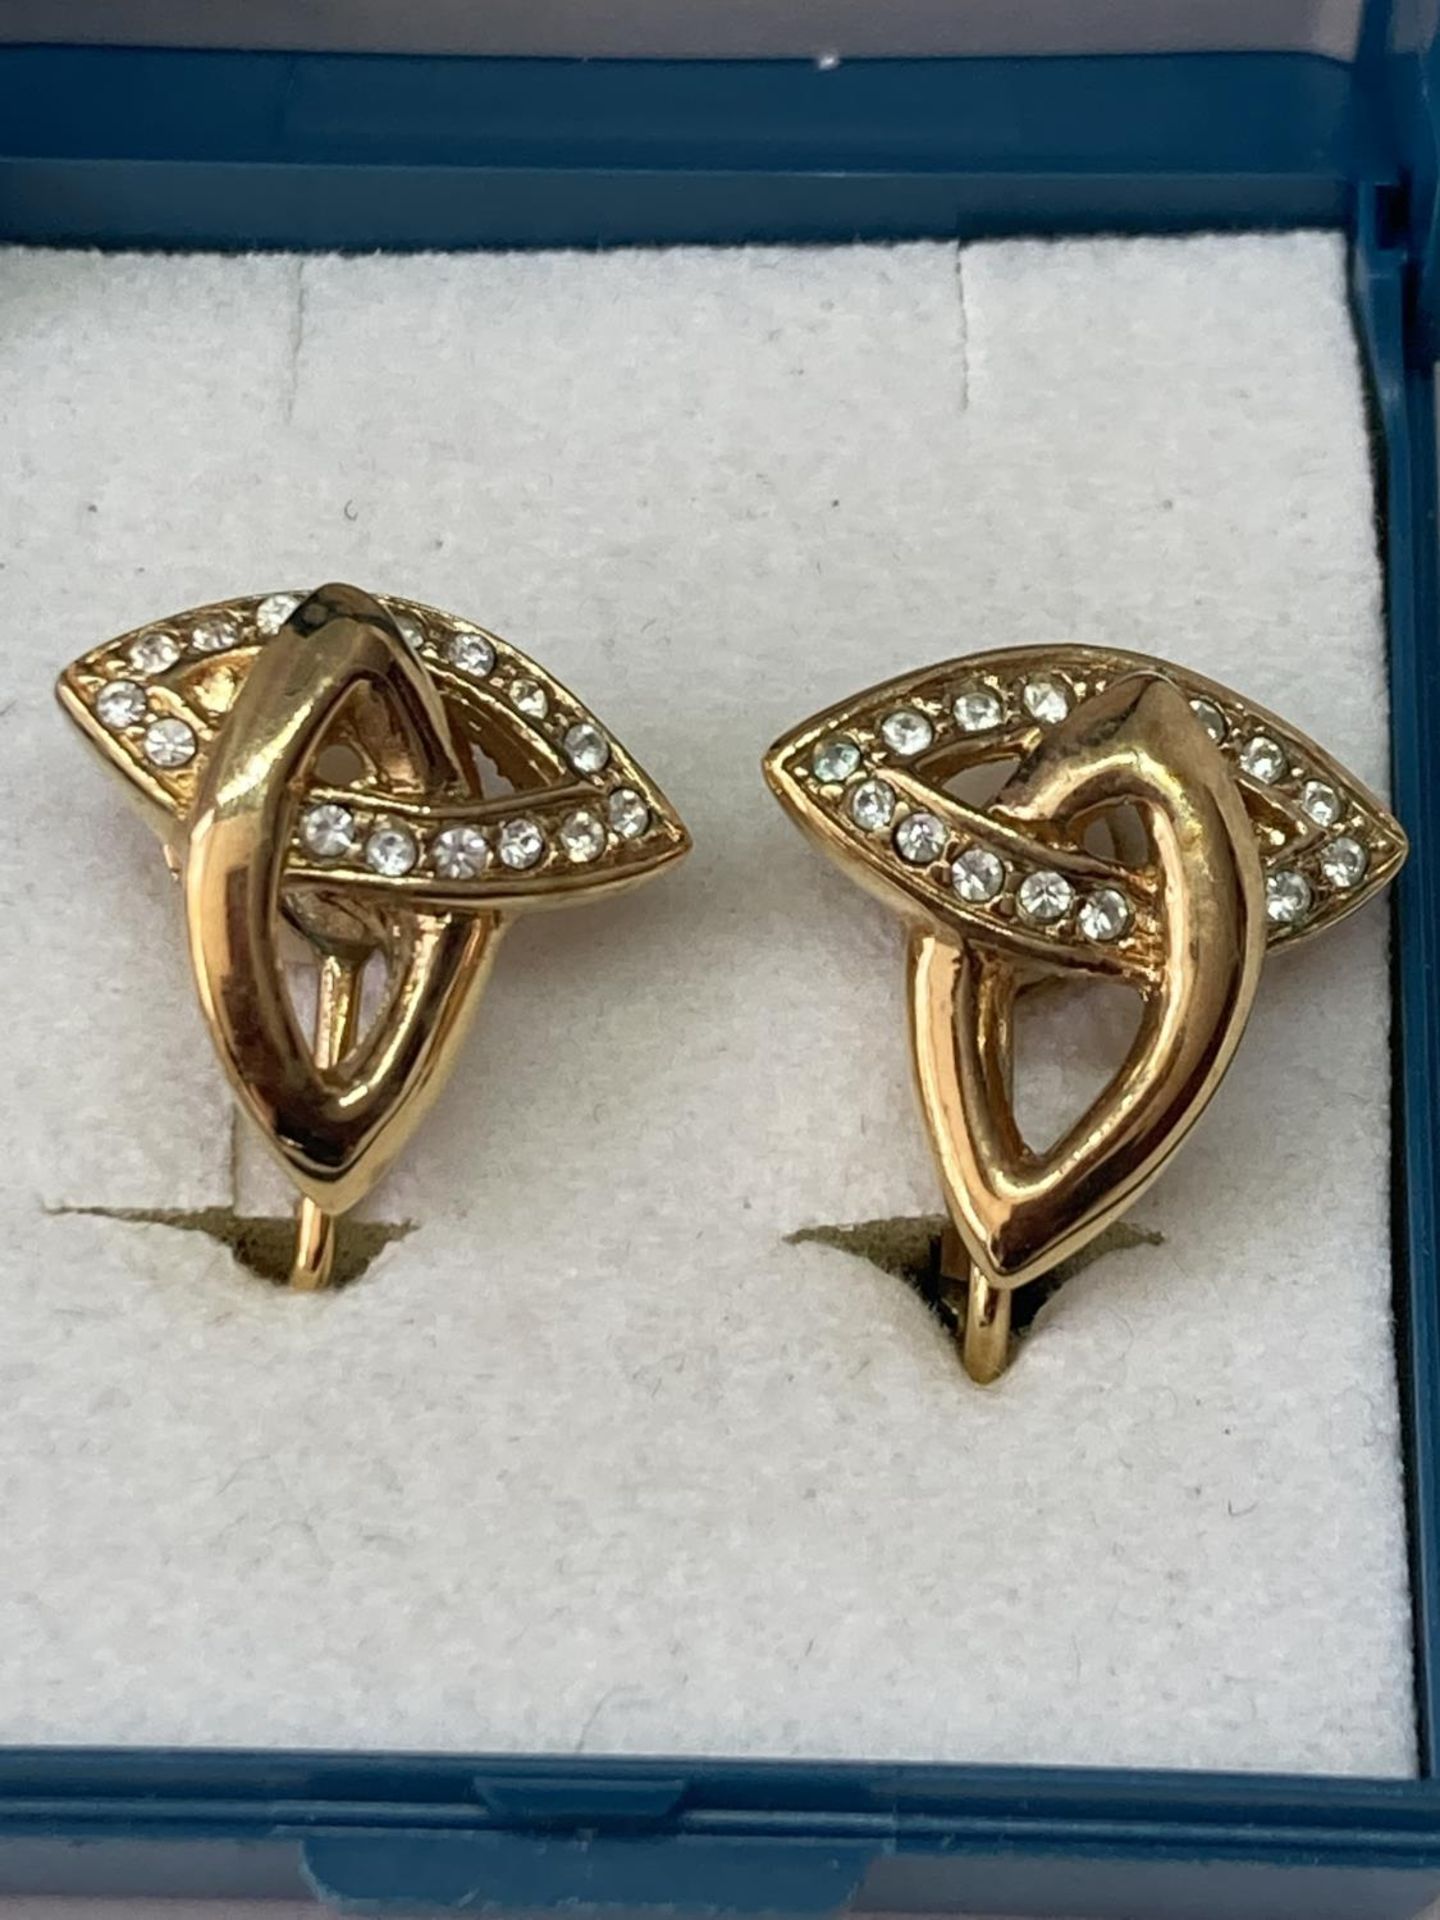 A PAIR OF VINTAGE ATTWOOD GOLD PLATED EARRINGS IN A PRESENTATION BOX - Image 3 of 8